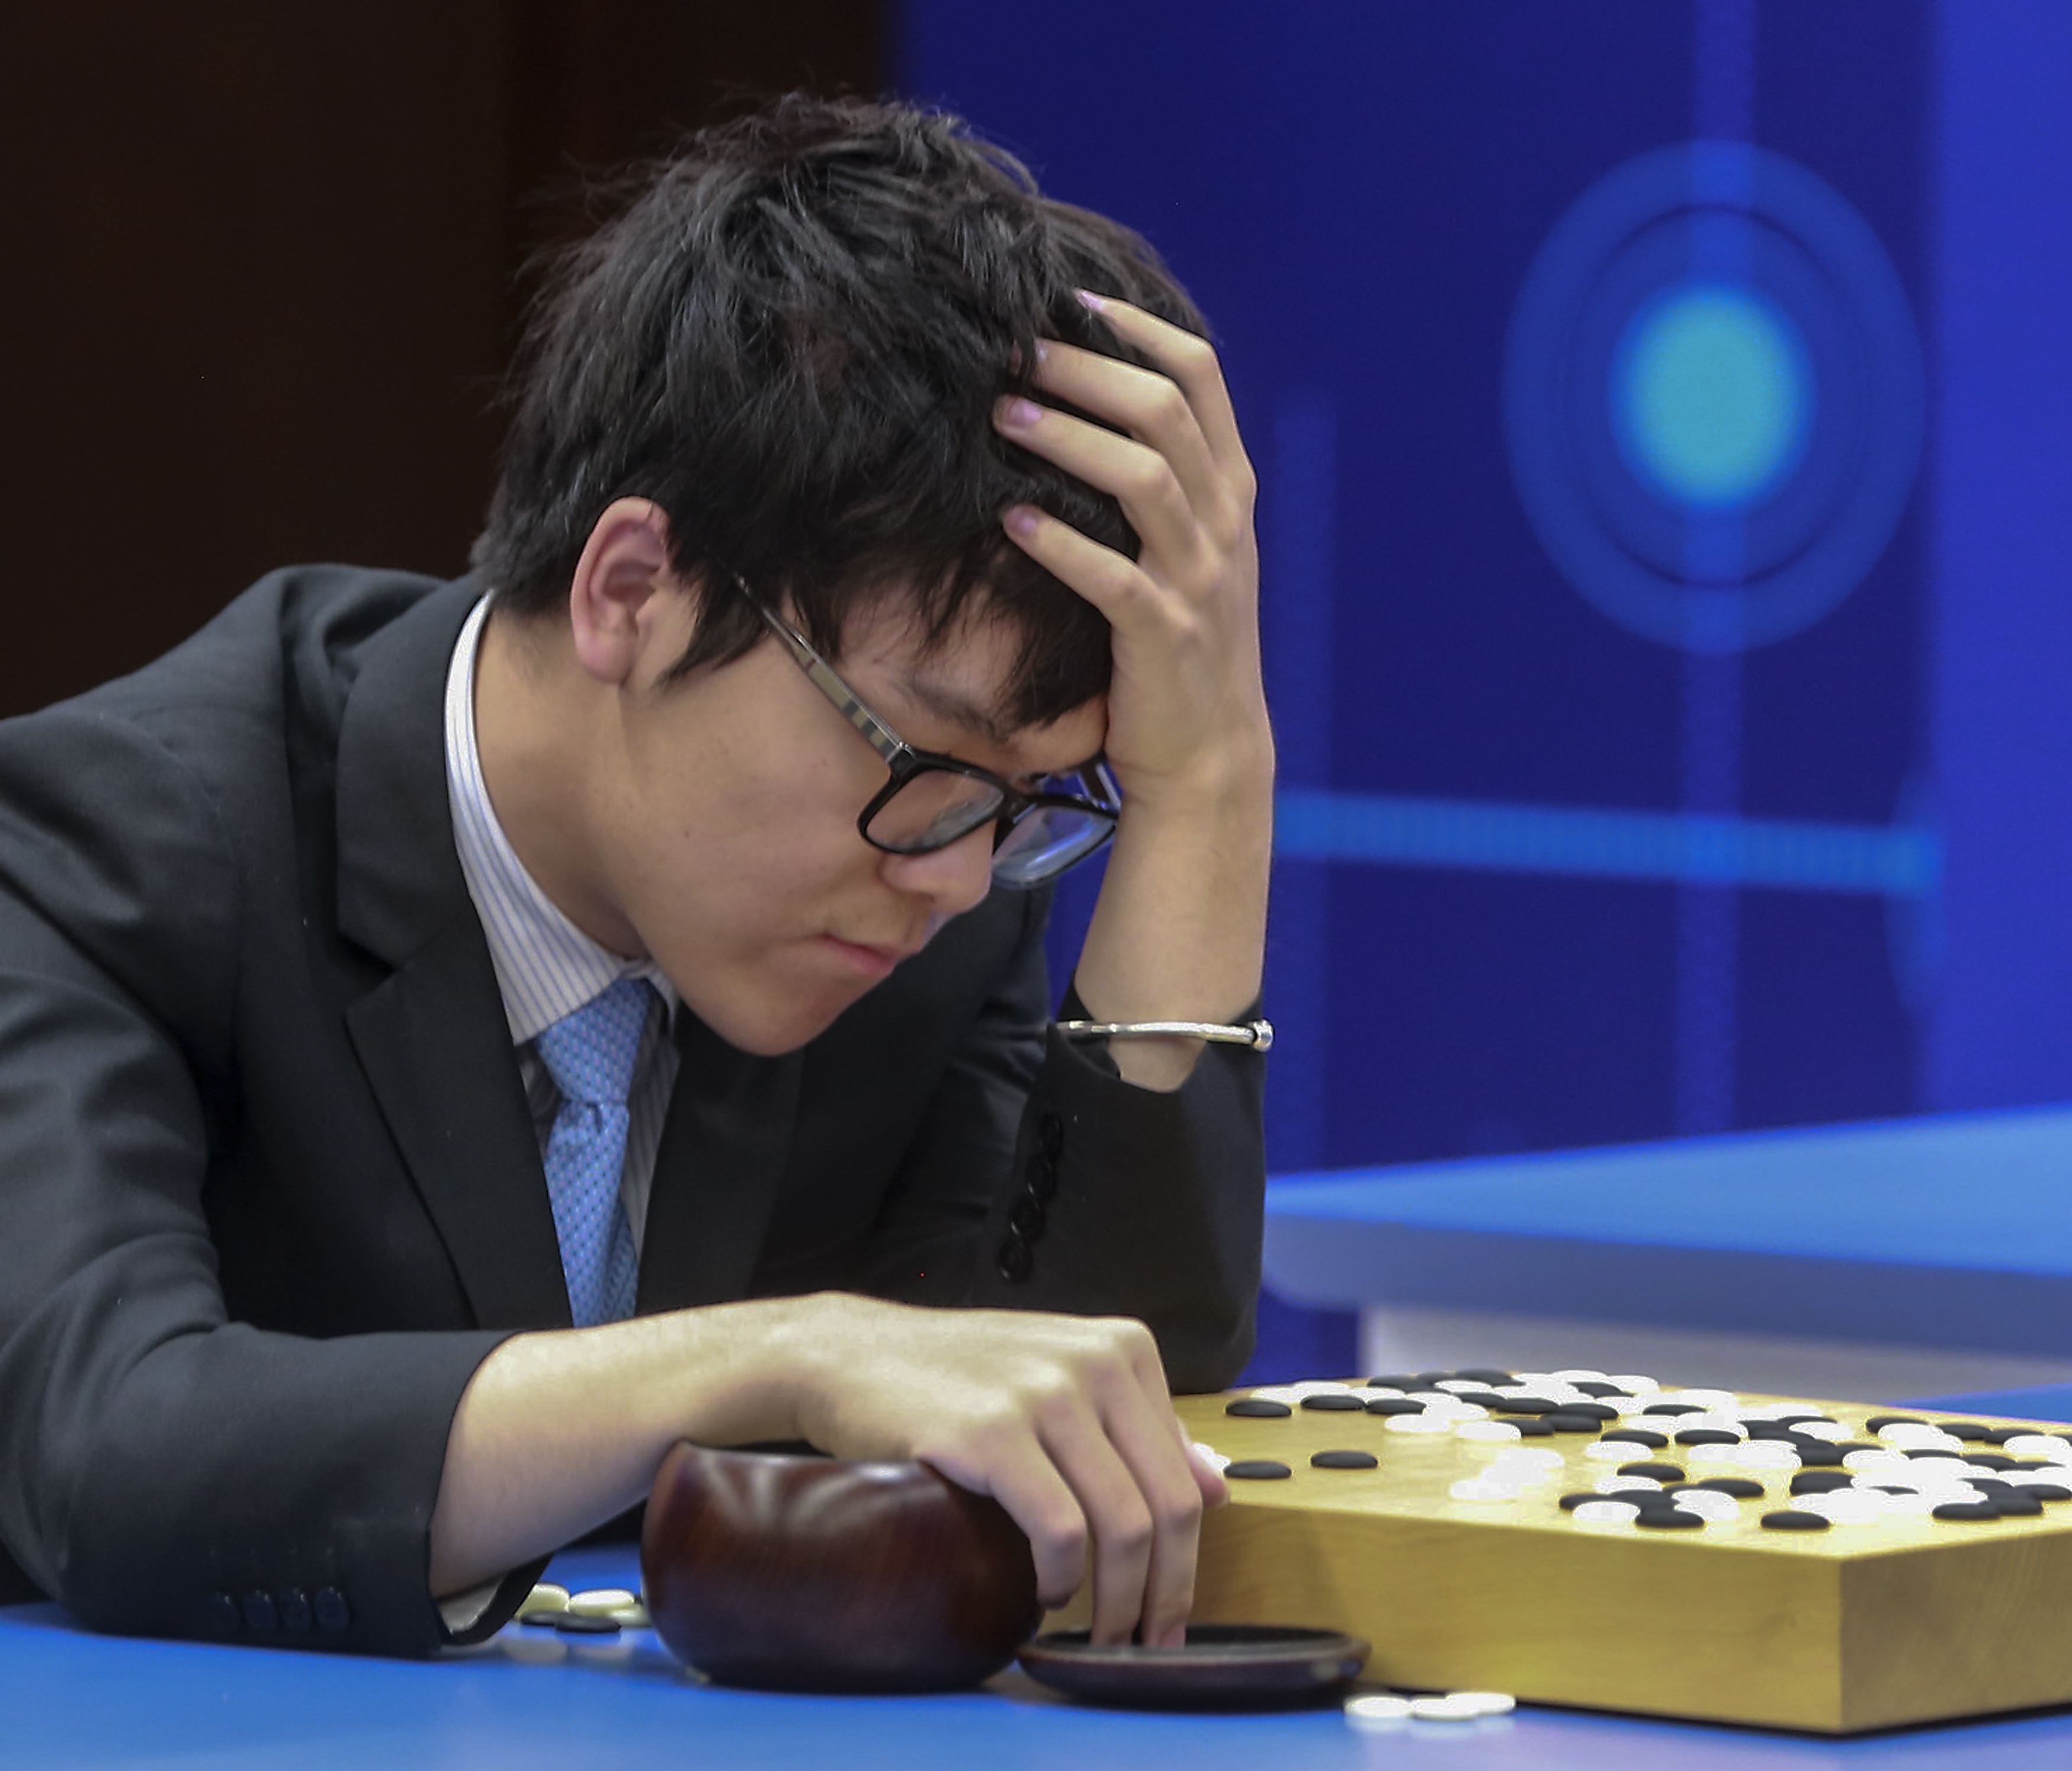 Chinese Go player Ke Jie reacts as he plays a match against Google's artificial intelligence program, AlphaGo, during the Future of Go Summit in Wuzhen in eastern China's Zhejiang Province.